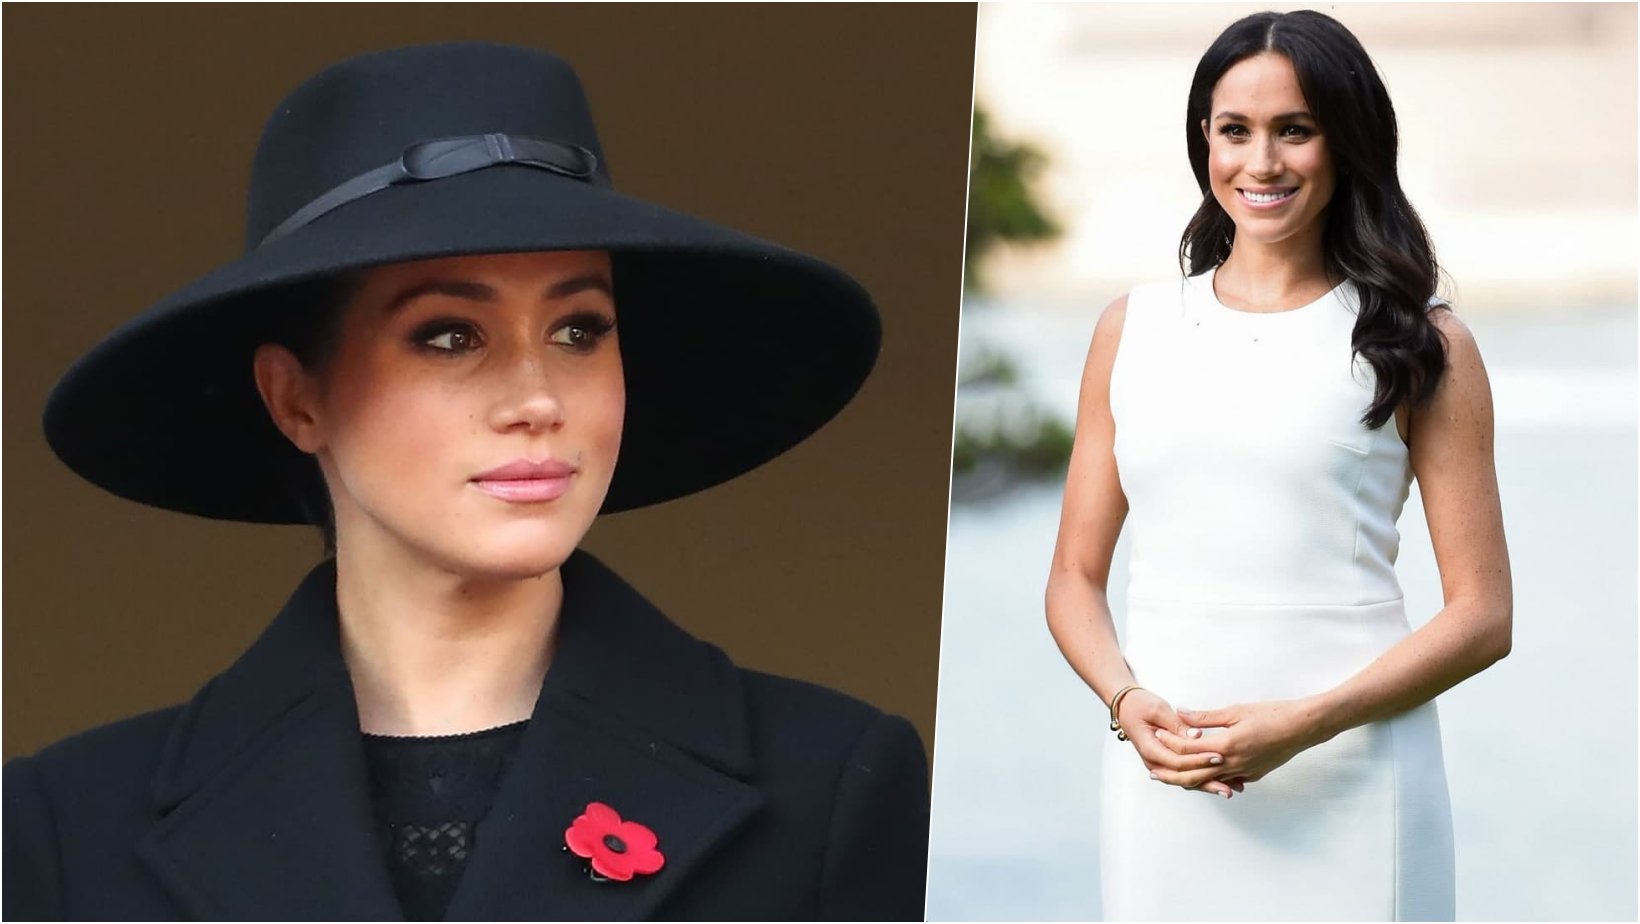 6 facebook cover.jpg?resize=1200,630 - Meghan Markle’s Lawyer Shut Down Allegations That The Duchess “BULLIED” Staff Members Of The Palace